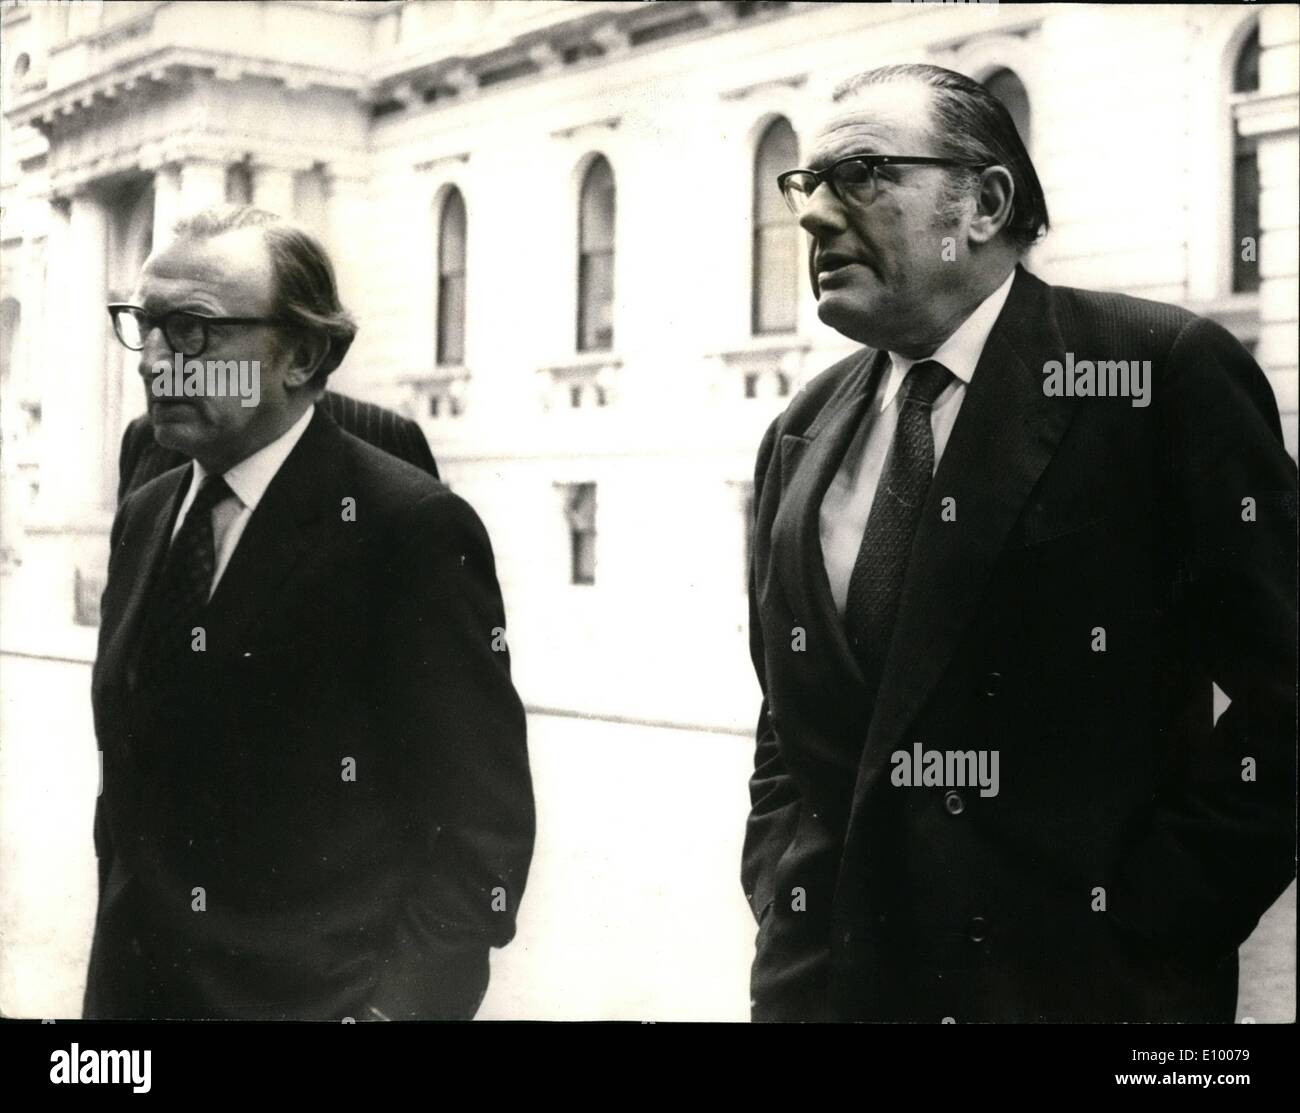 Jan. 01, 1972 - Cabinet Meeting at No. 10 Downing Street; Photo Shows Lord Carrington (left), the Defense Secretary, arriving with Mr . Reginald Maudling, the Home Secretary, for today's Cabinet Meeting at No. 10 Downing Street. Stock Photo